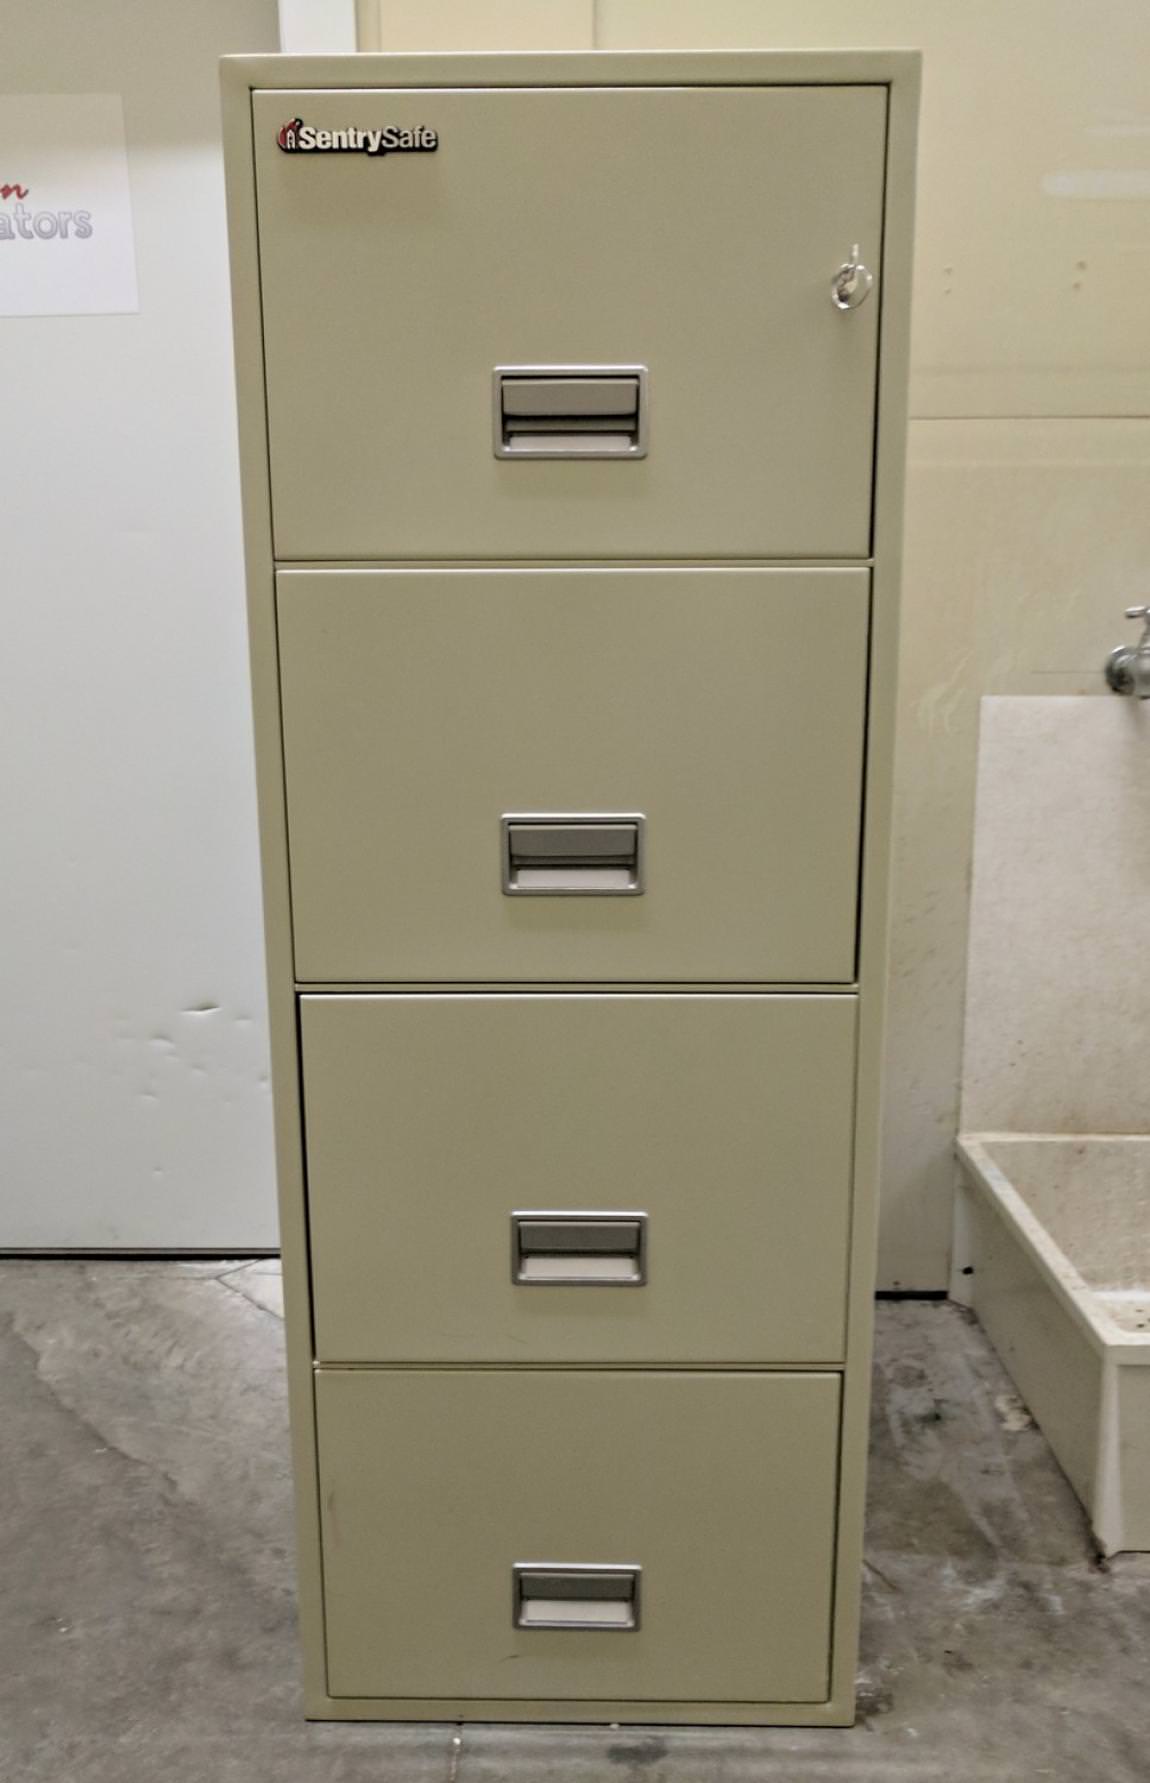 Tan Sentry Safe Fireproof 4 Drawer Vertical Legal File by